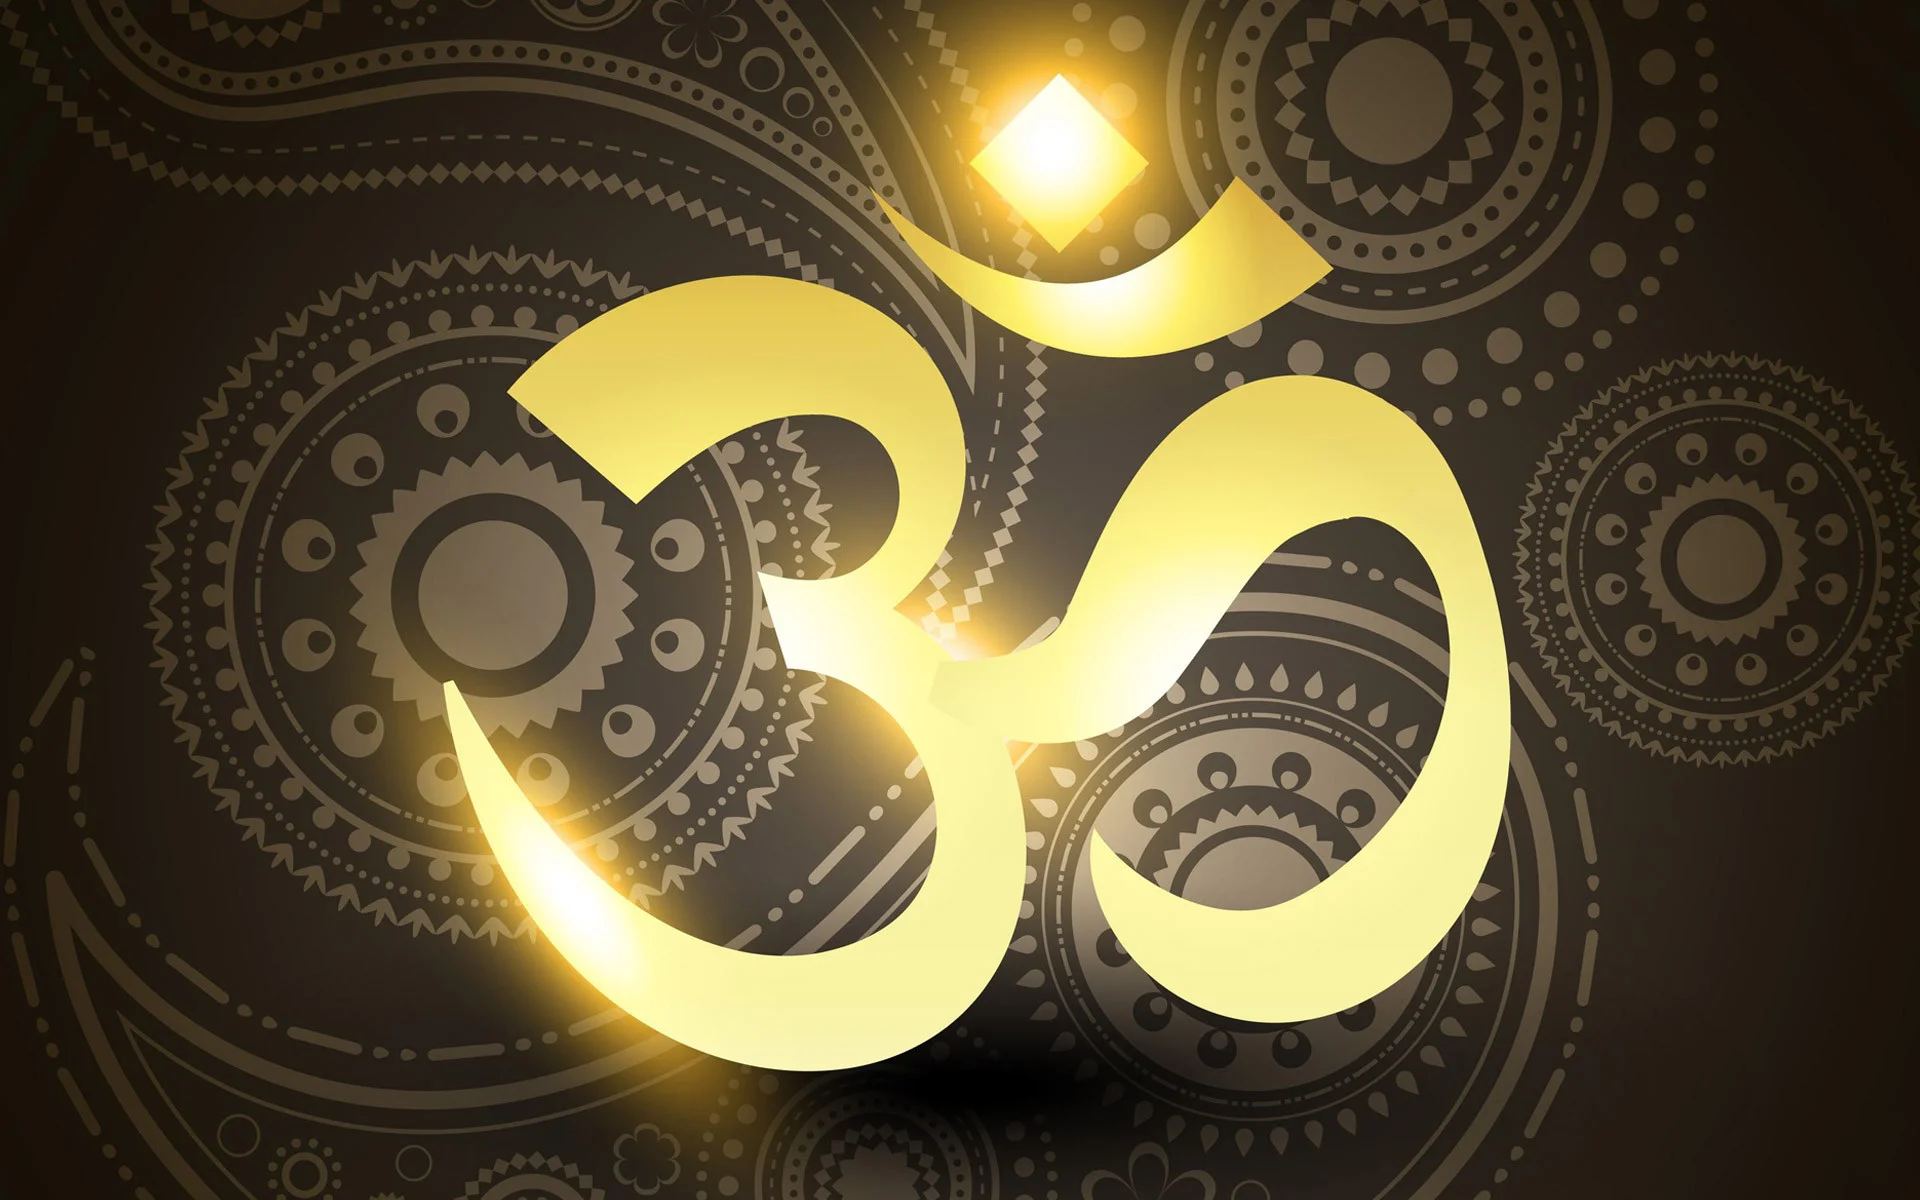 best-om-symbol-in-hd-quality-wallpapers-free-